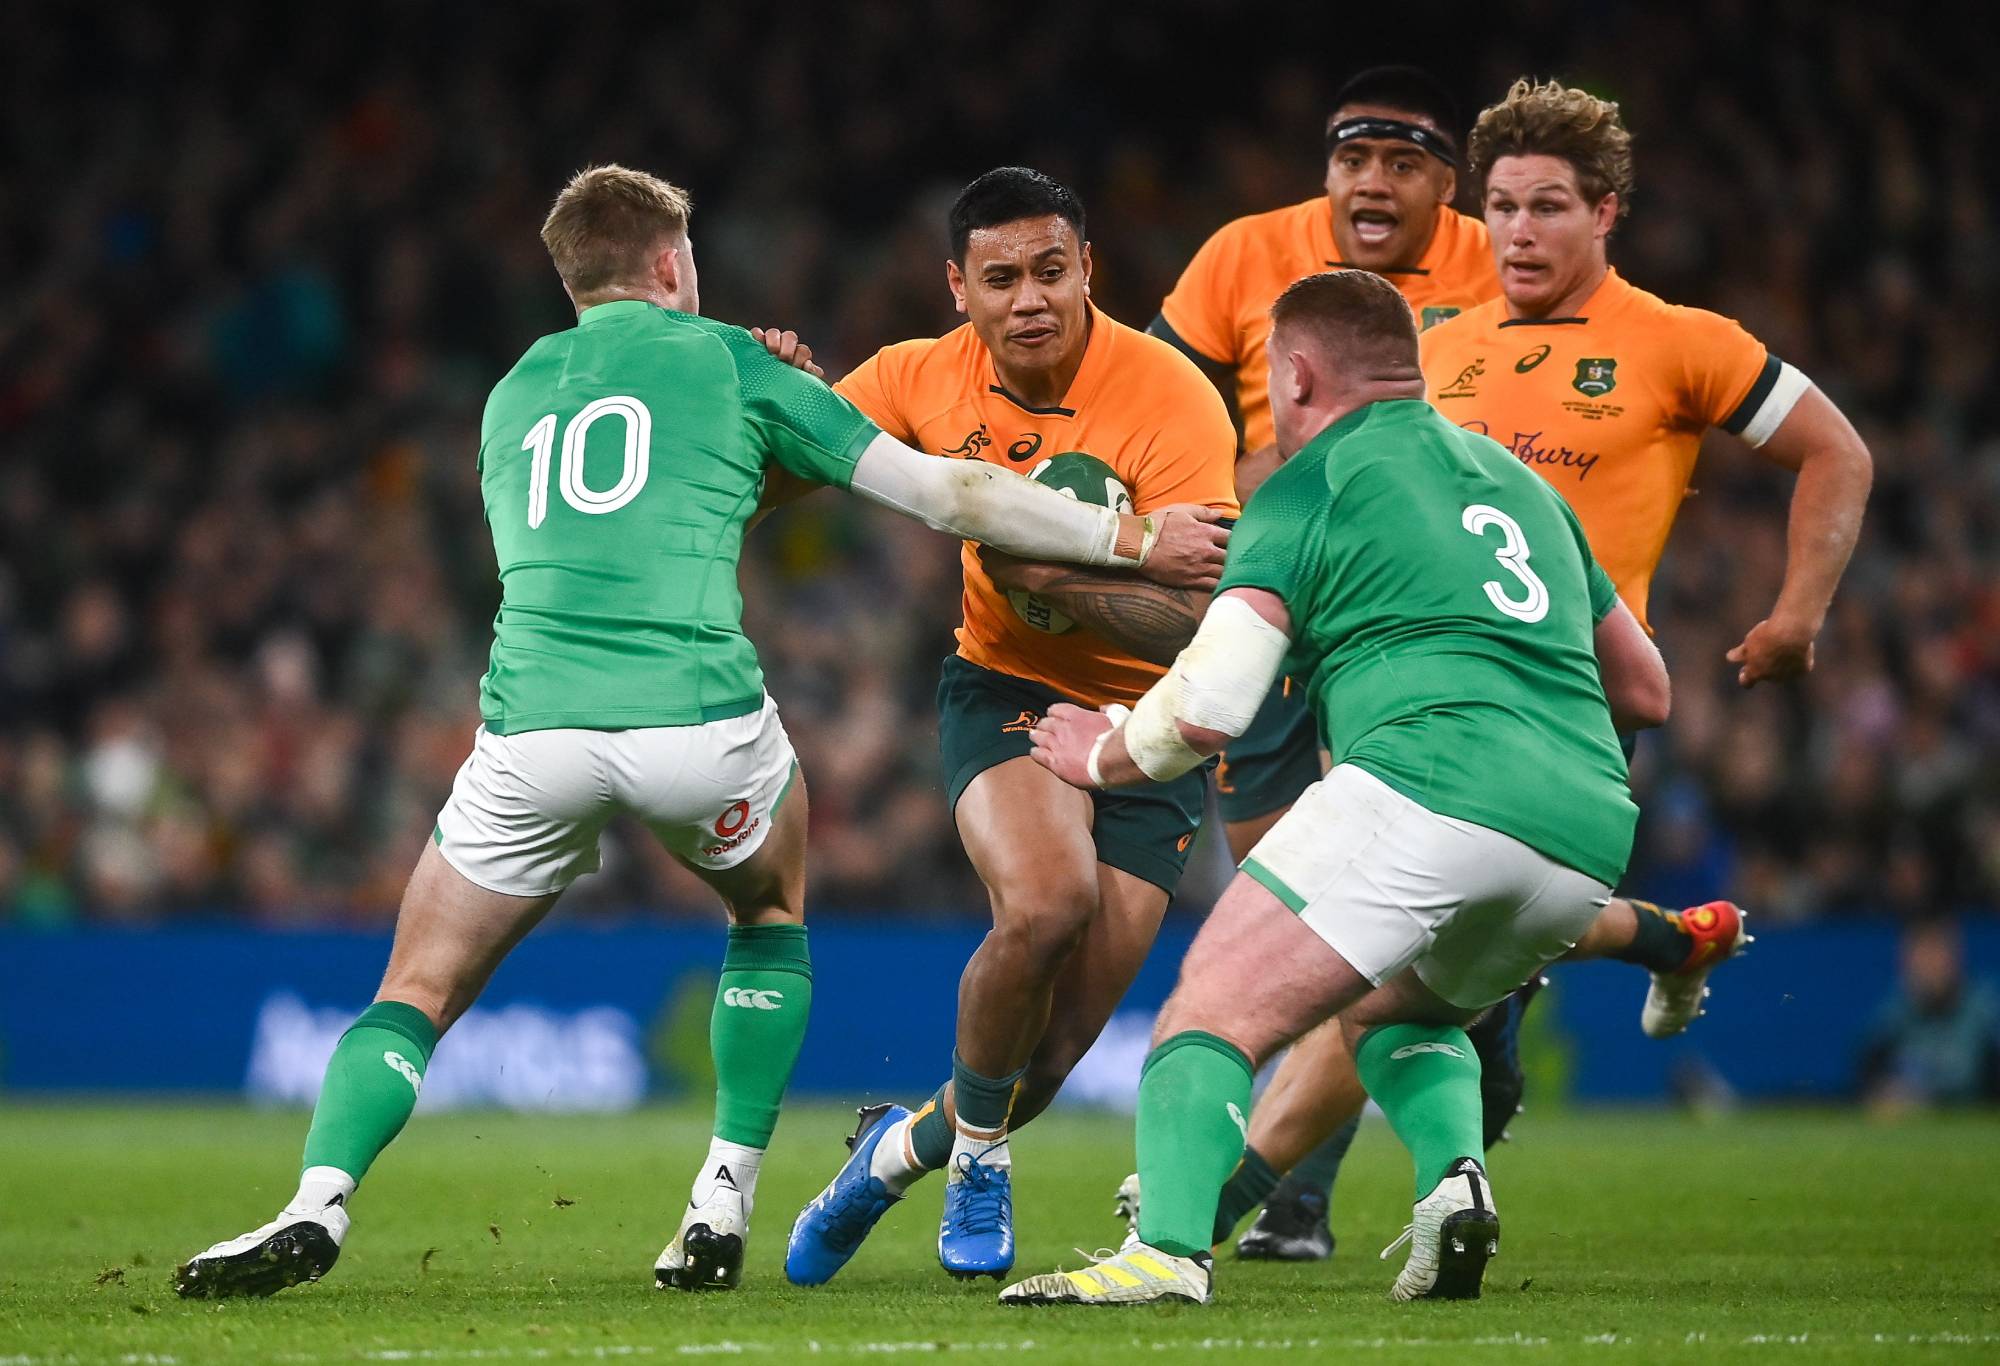 Len Ikitau of Australia is tackled by Jack Crowley, left, and Tadhg Furlong of Ireland during the Bank of Ireland Nations Series match between Ireland and Australia at the Aviva Stadium in Dublin. (Photo By David Fitzgerald/Sportsfile via Getty Images)